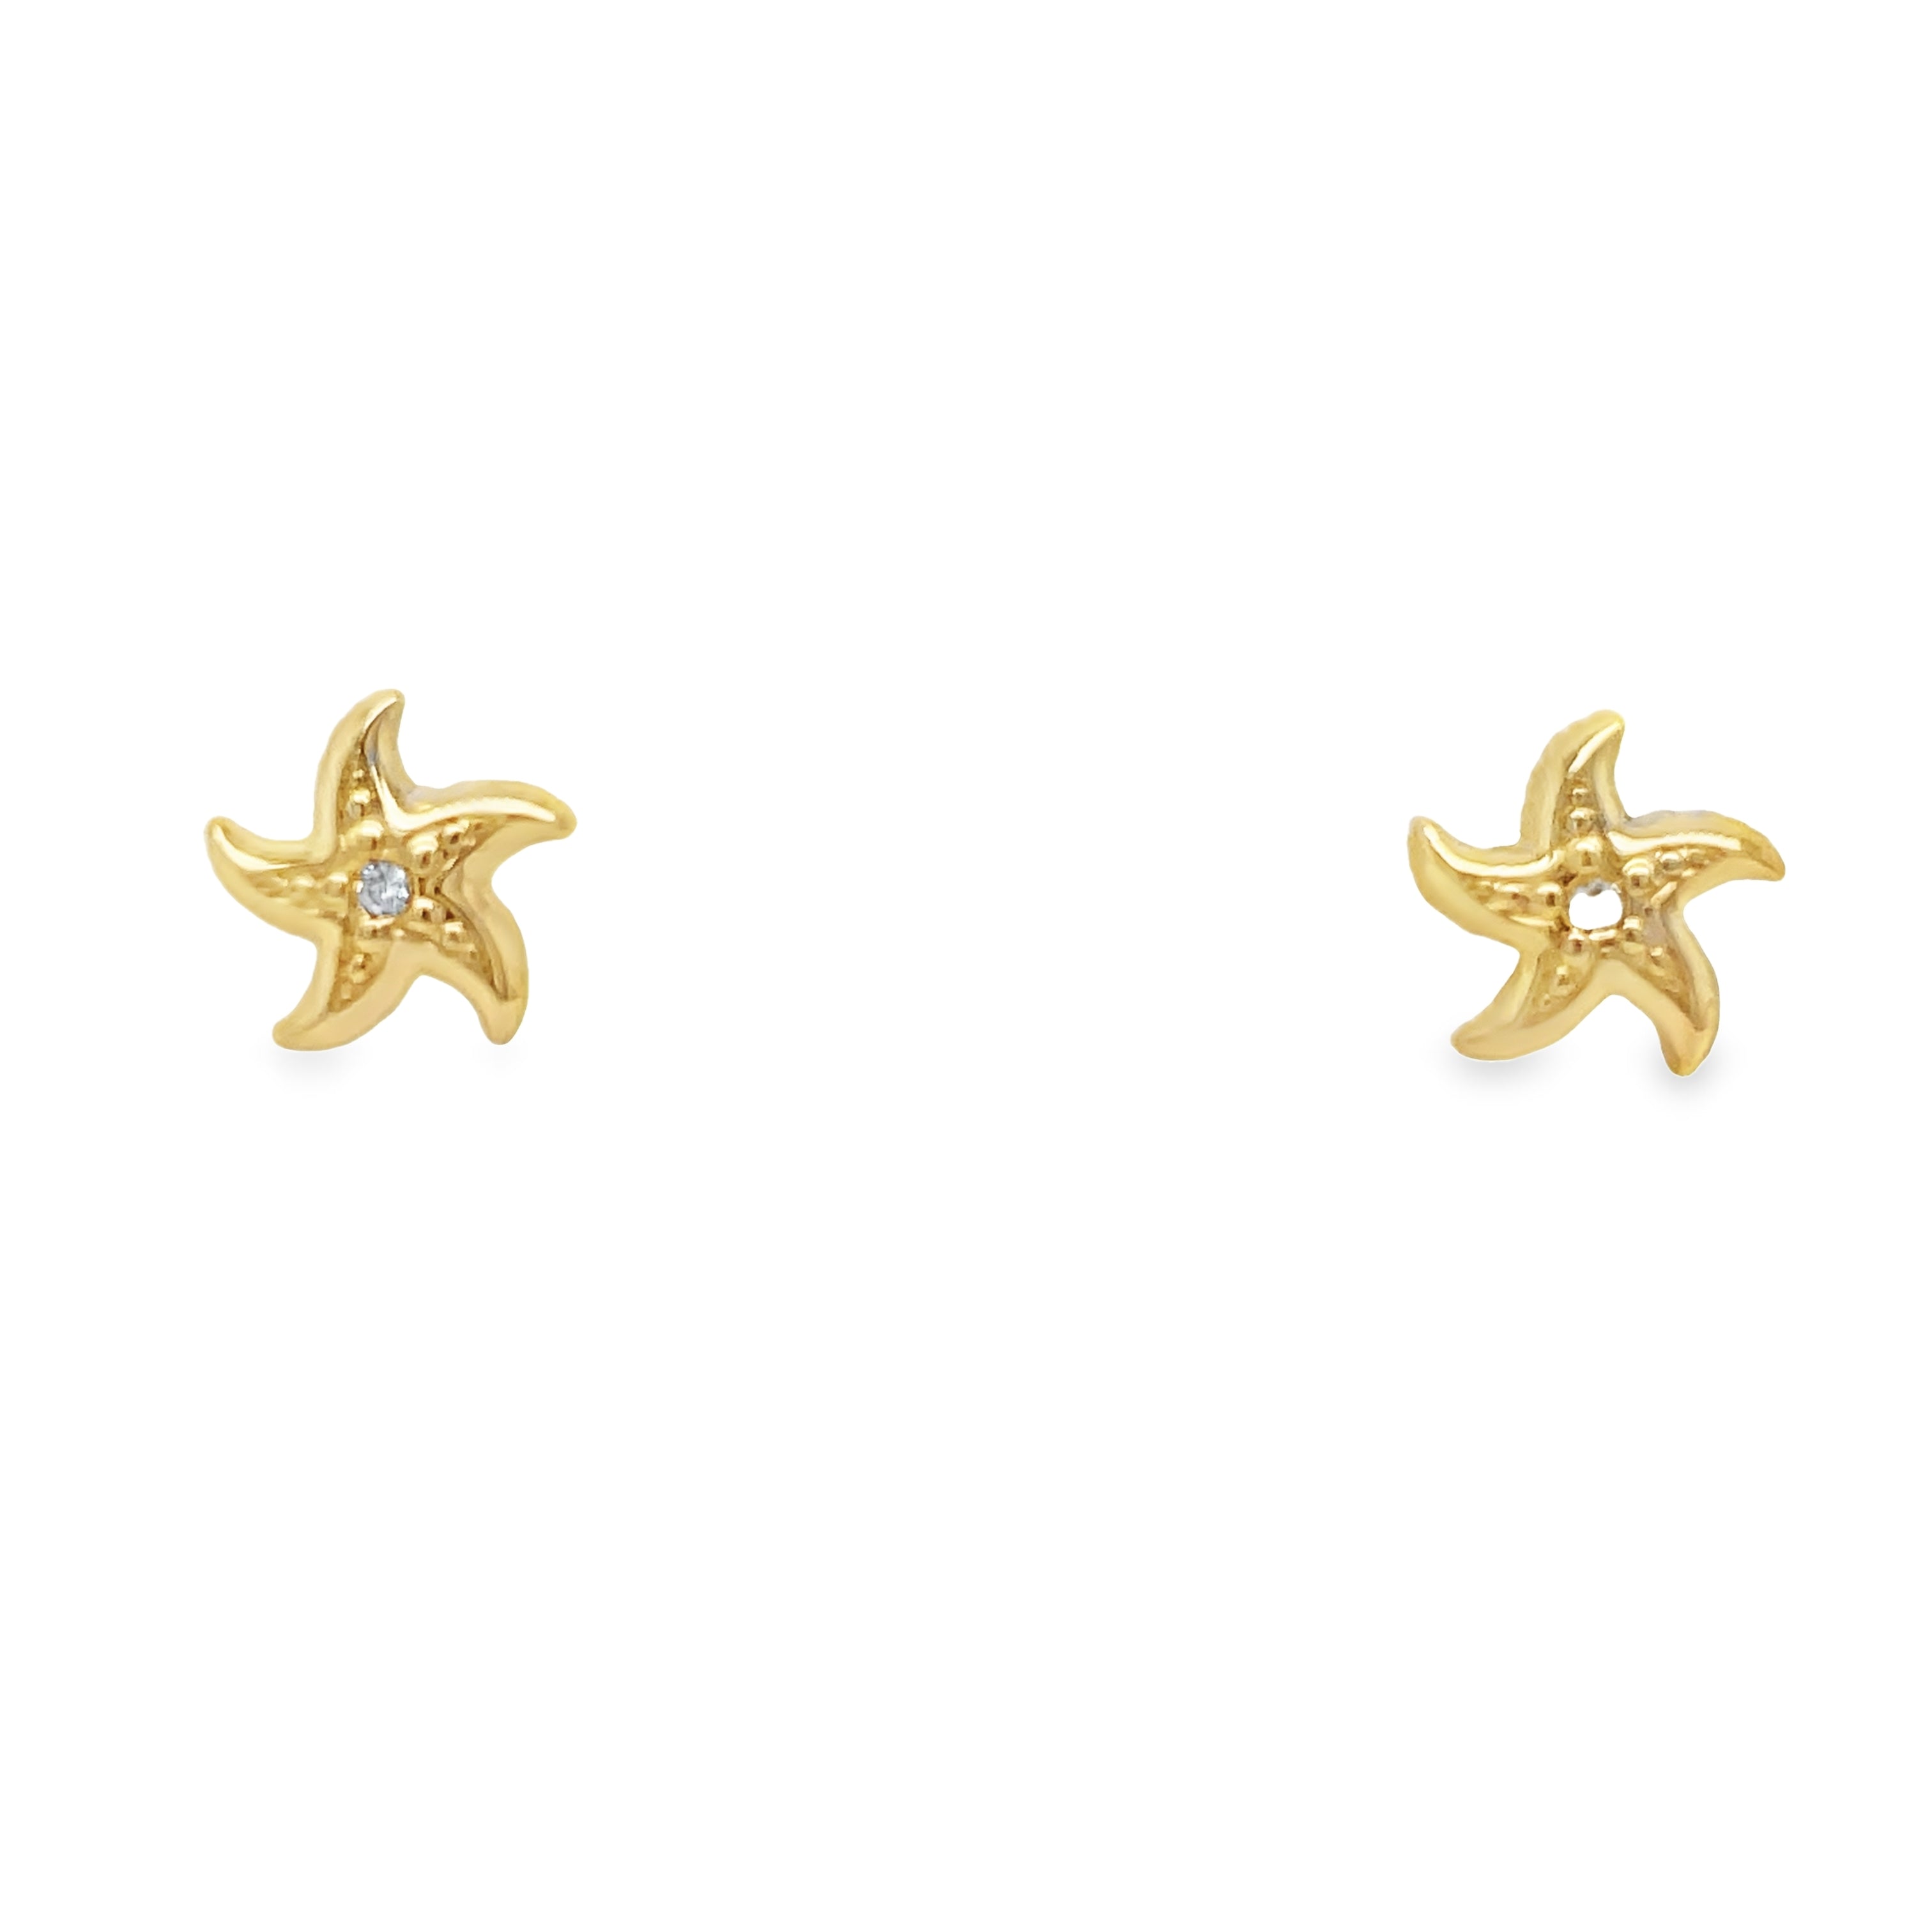 These exquisite flower earrings for babies feature 14k yellow gold construction with star shape securely affixed using baby screw backs.